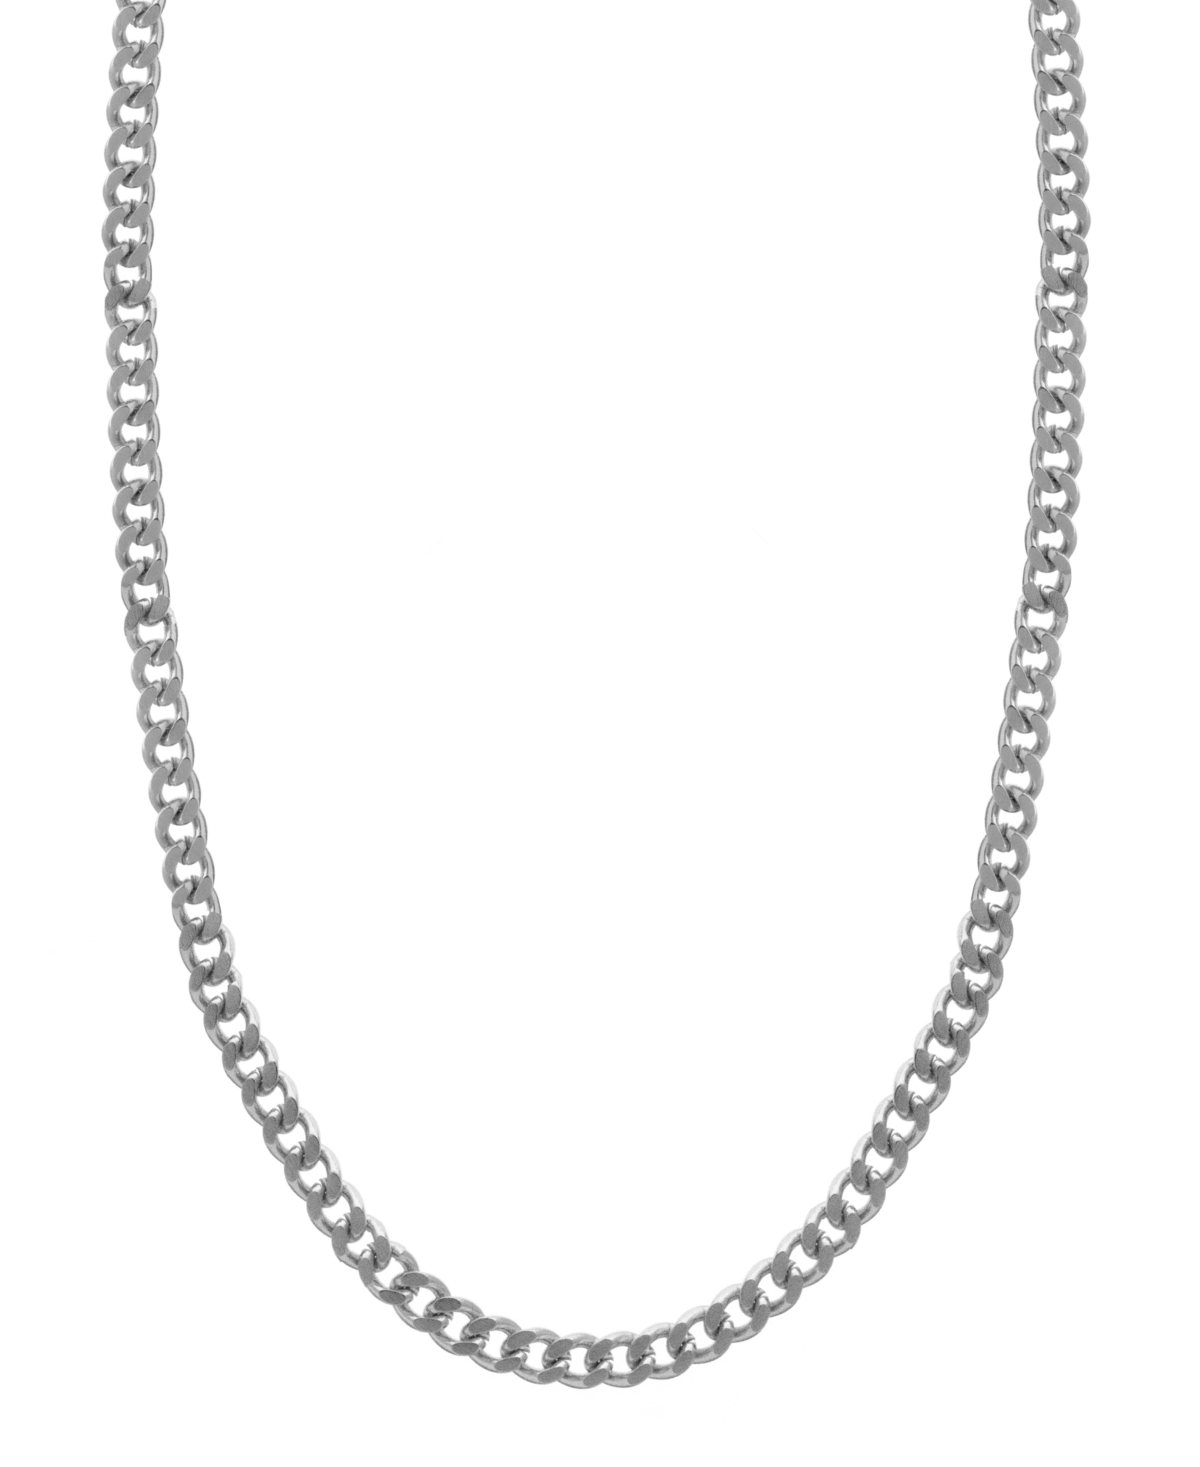 Curb Chain Necklace, Gold Plate and Silver Plate 24" - Silver-Tone